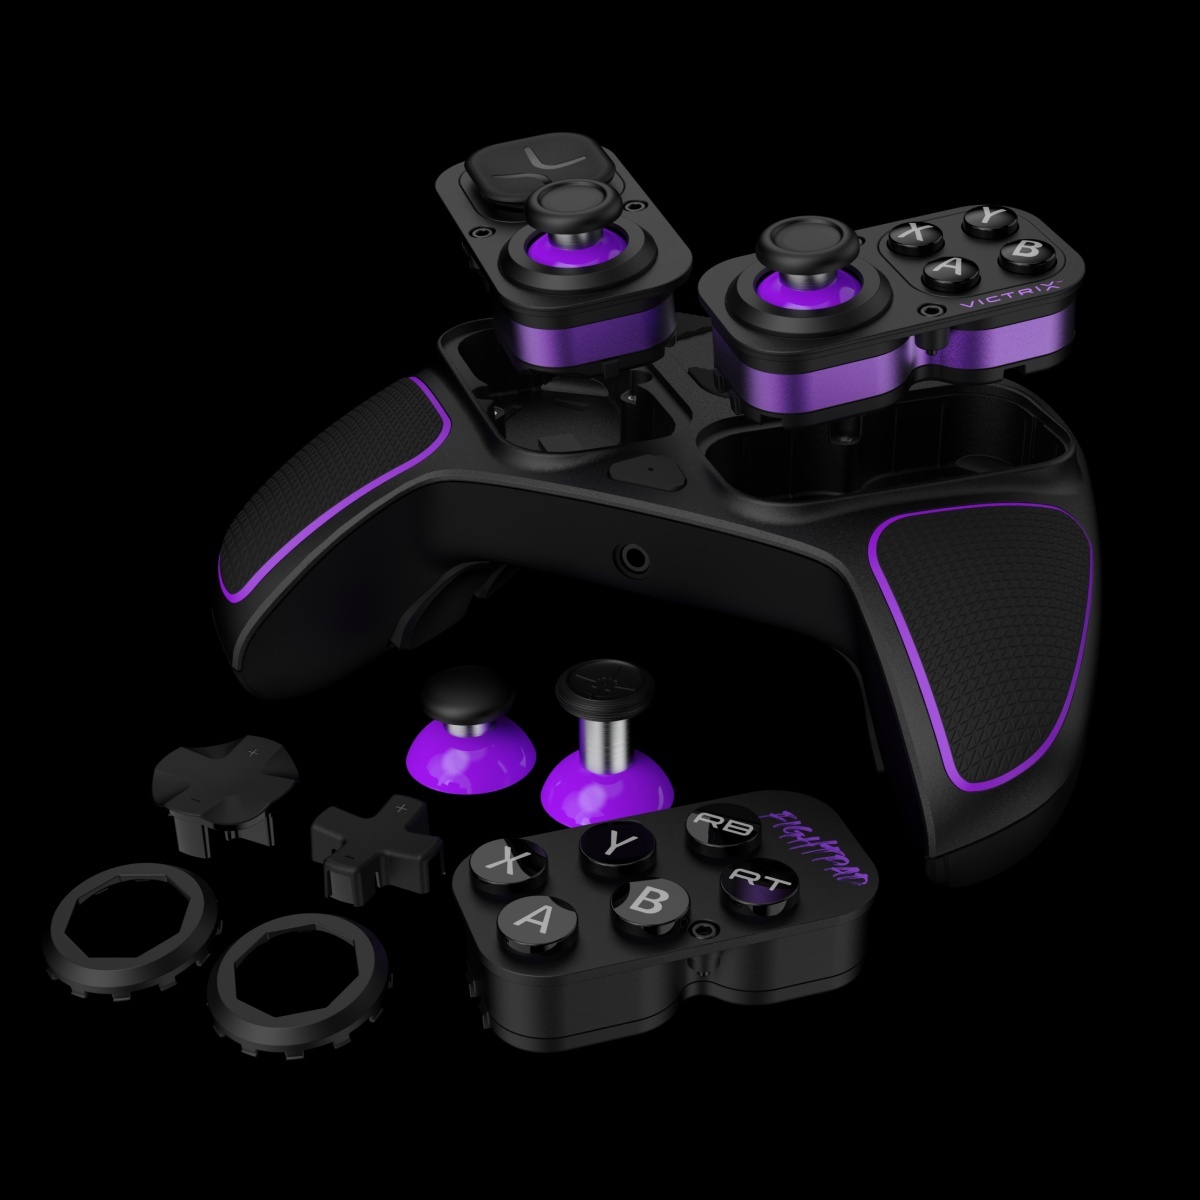 Image for Tech Up! Victrix Pro BFG Wireless Controller Review